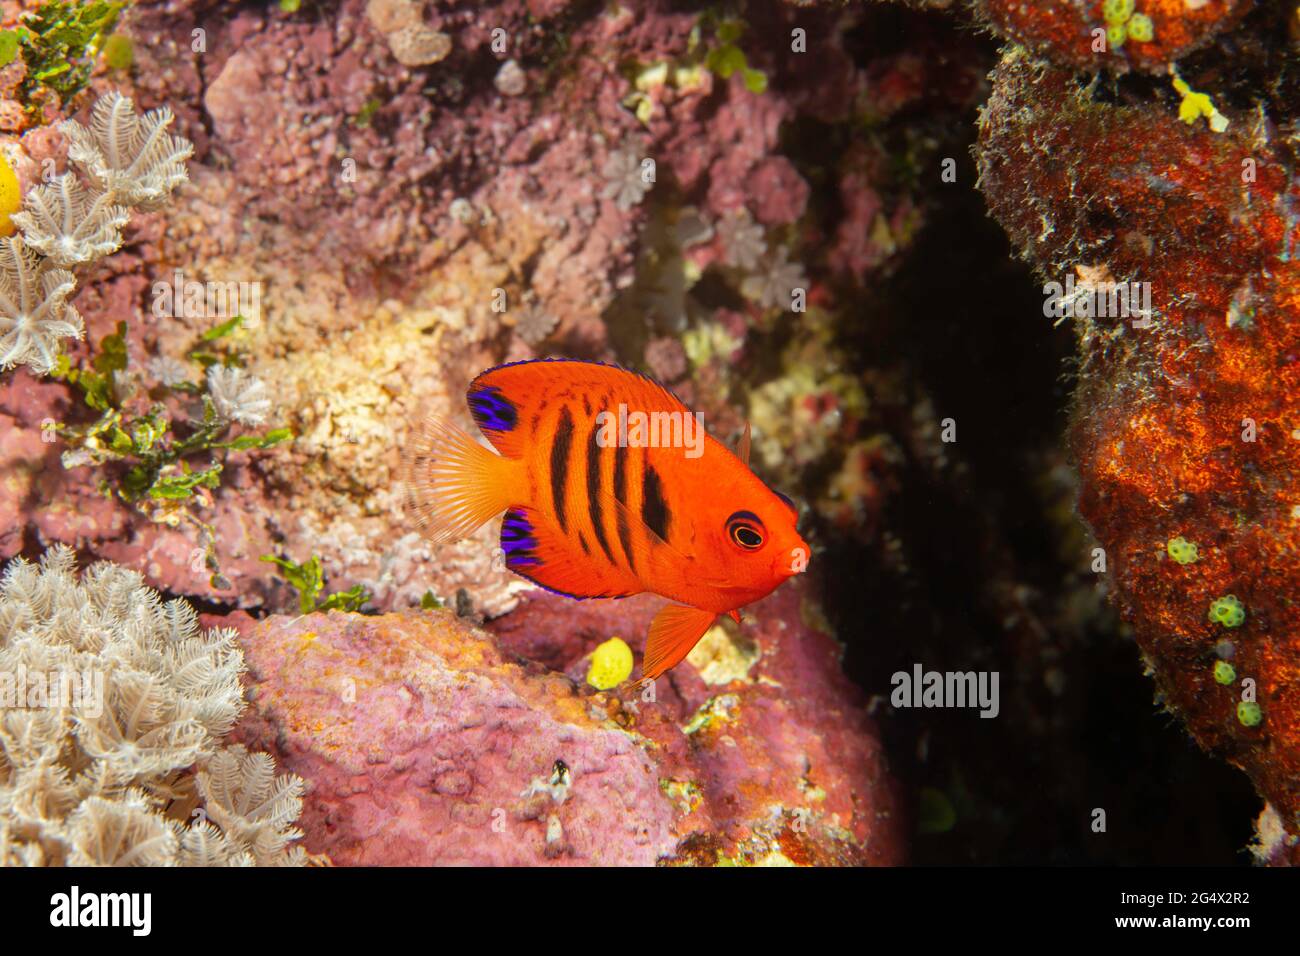 Flame angelfish, Centropyge loricula, on a reef off the island of Yap, Micronesia. Stock Photo